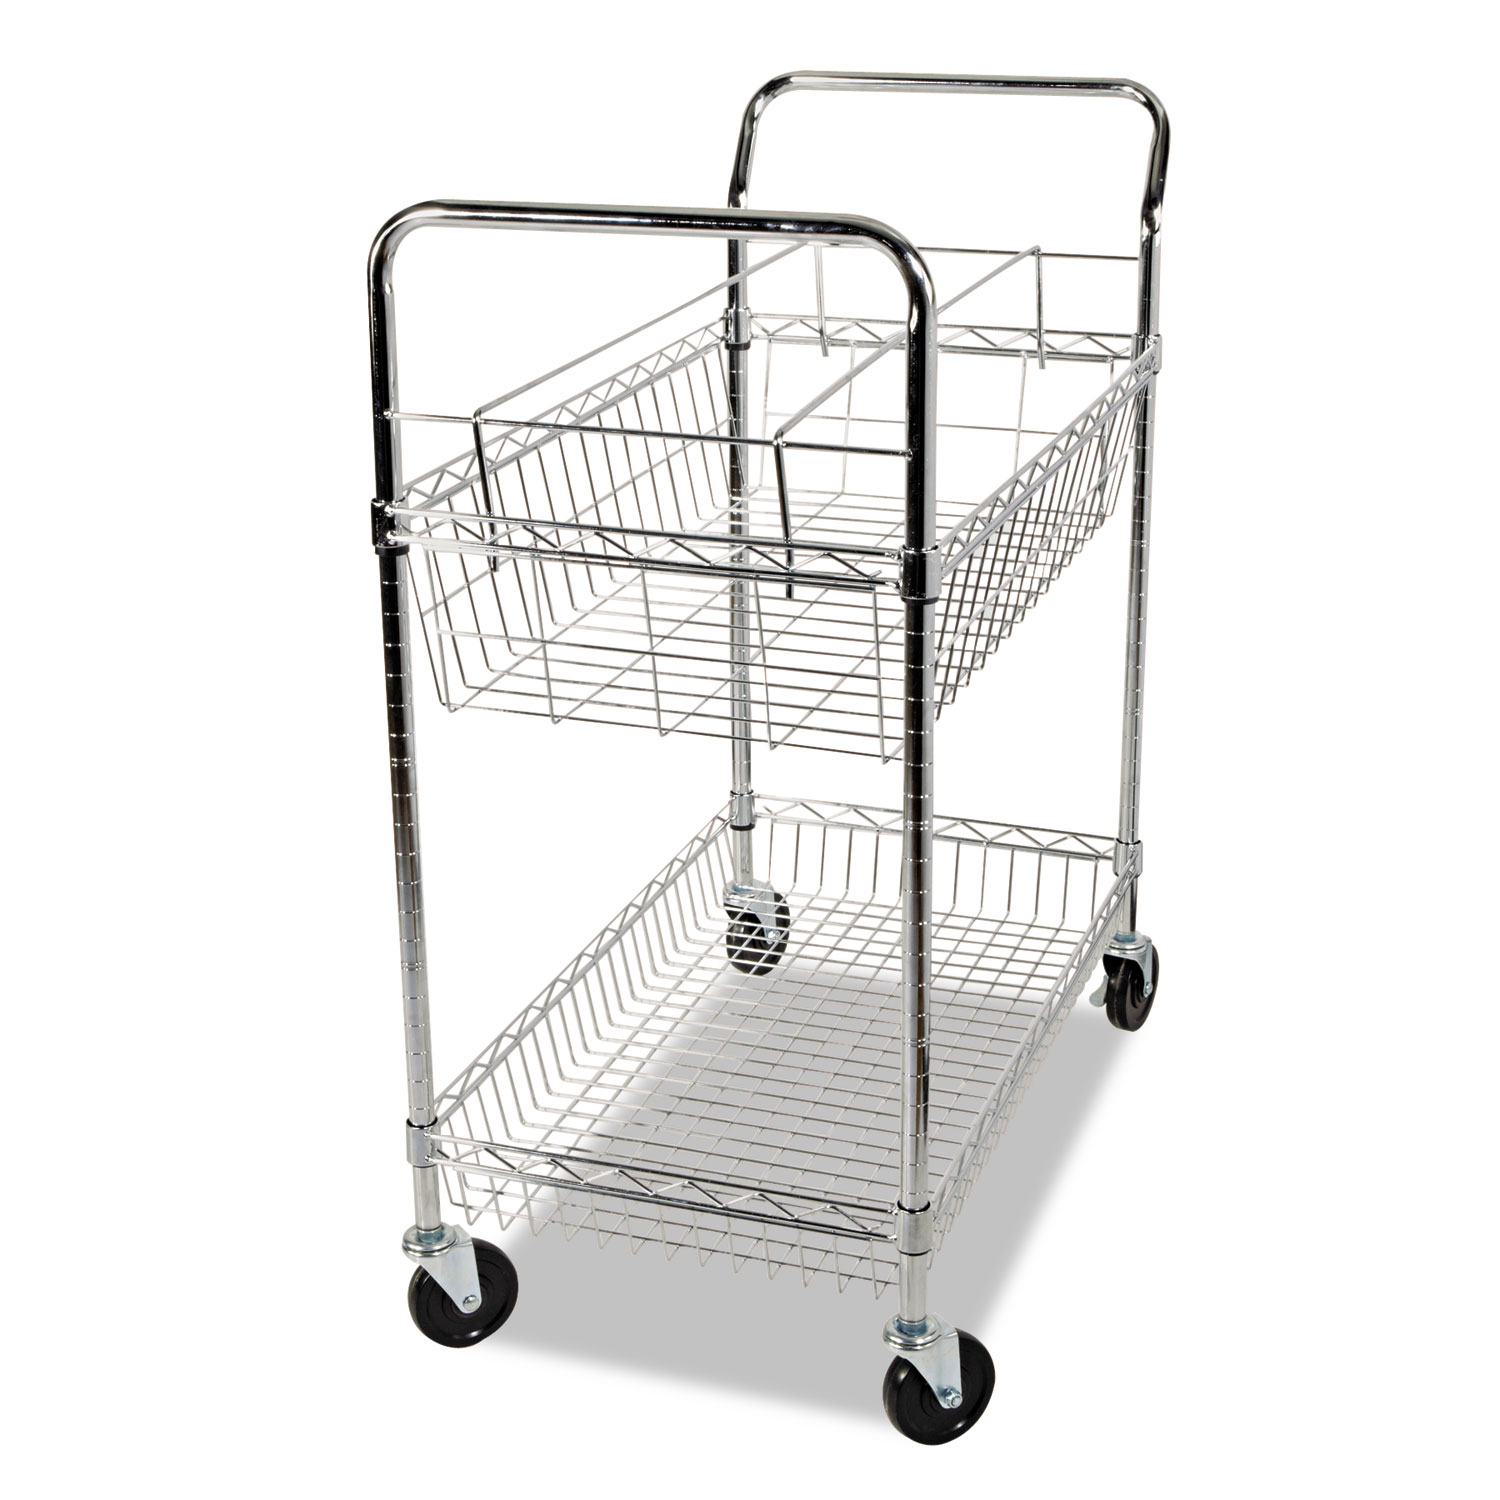 Carry-all Cart/Mail Cart, Two-Shelf, 34-7/8w x 18d x 39-1/2h, Silver